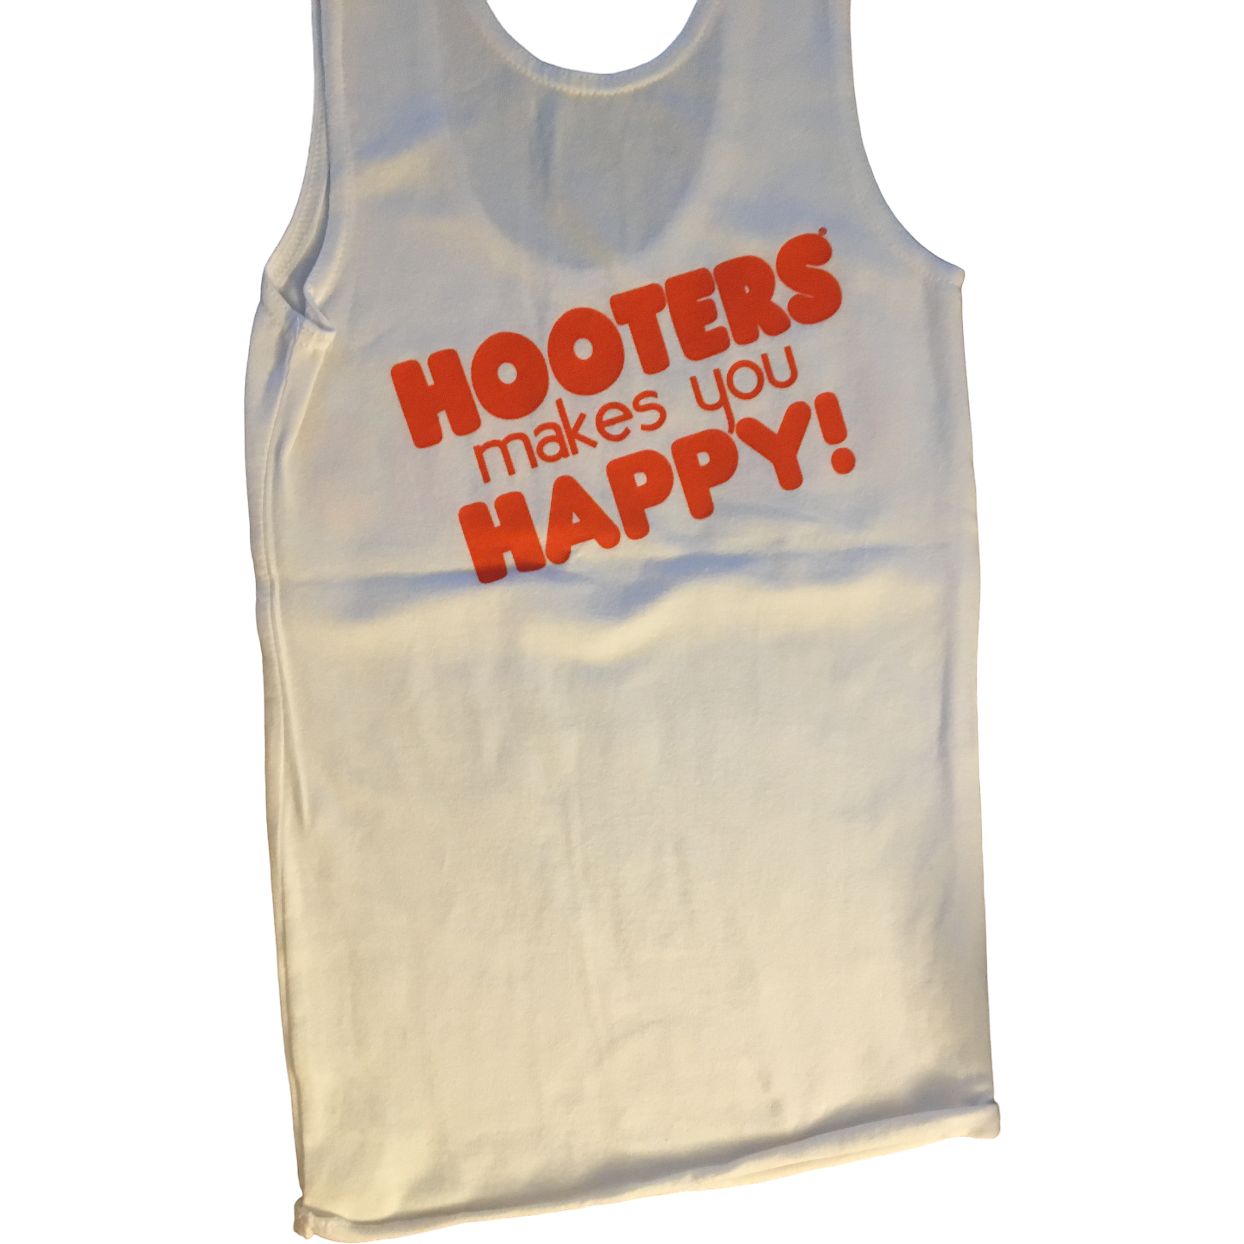 Myrtle Bch Hooters Women's Costume White Tank Top